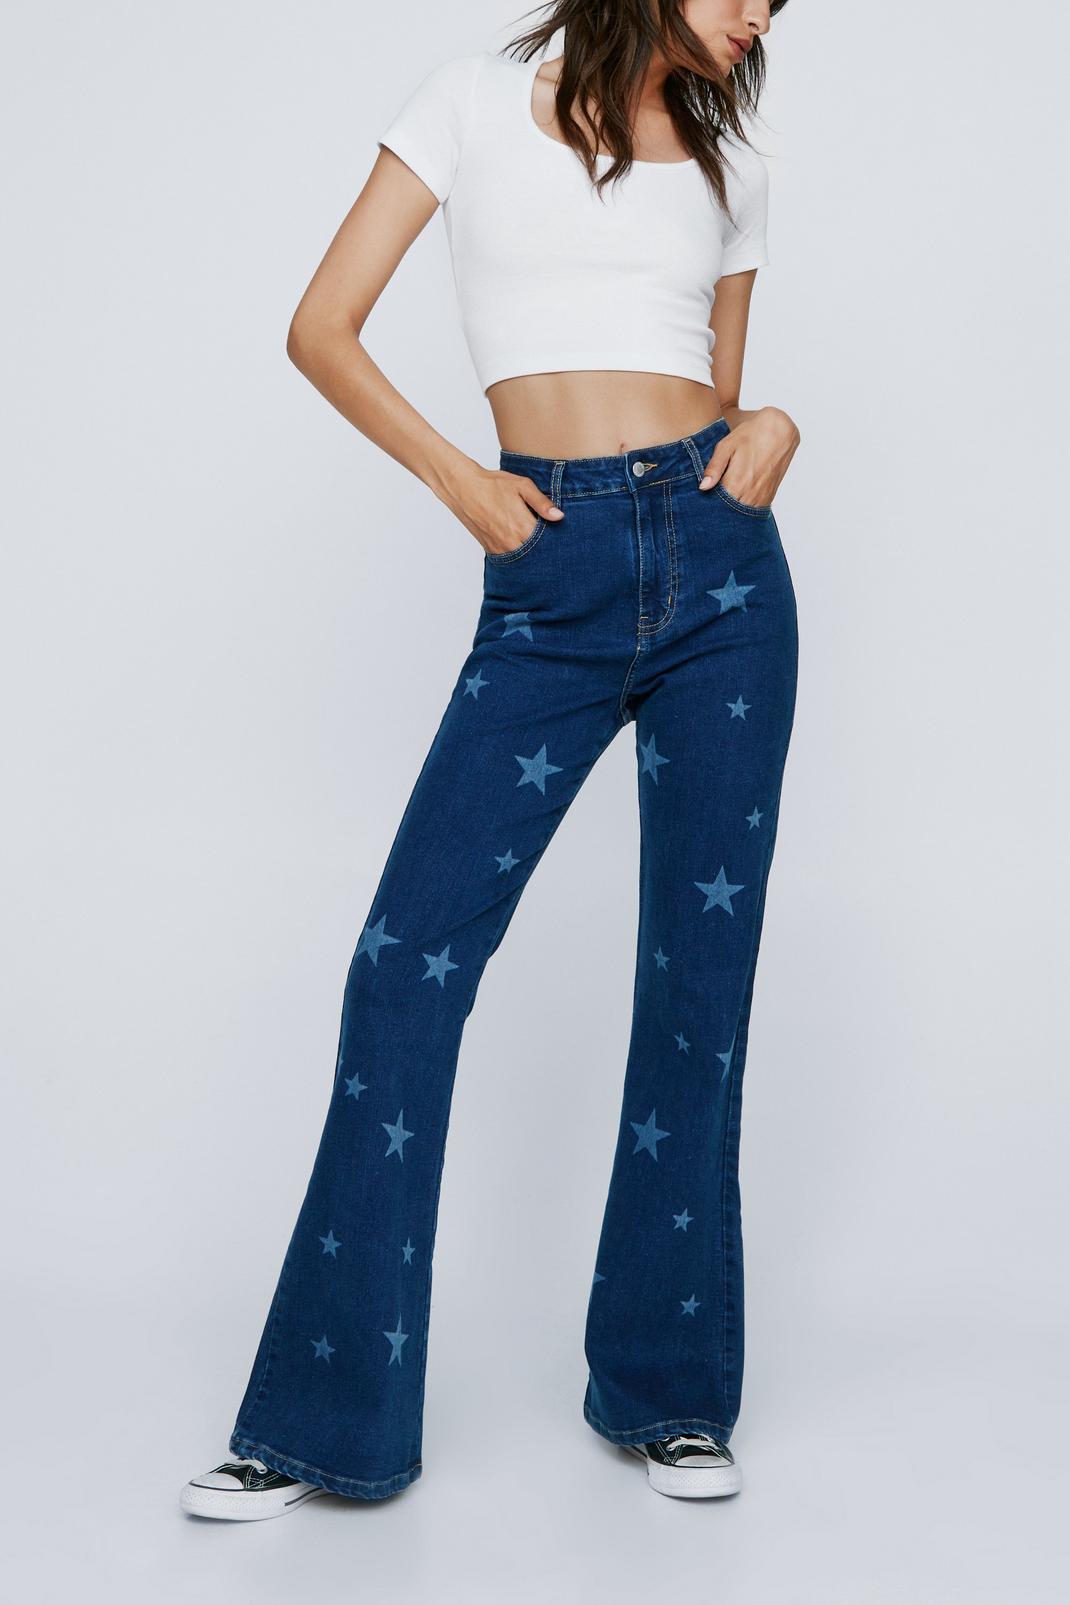 Faux Leather Star Bottom Flare Pants Nasty Gal, 59% OFF